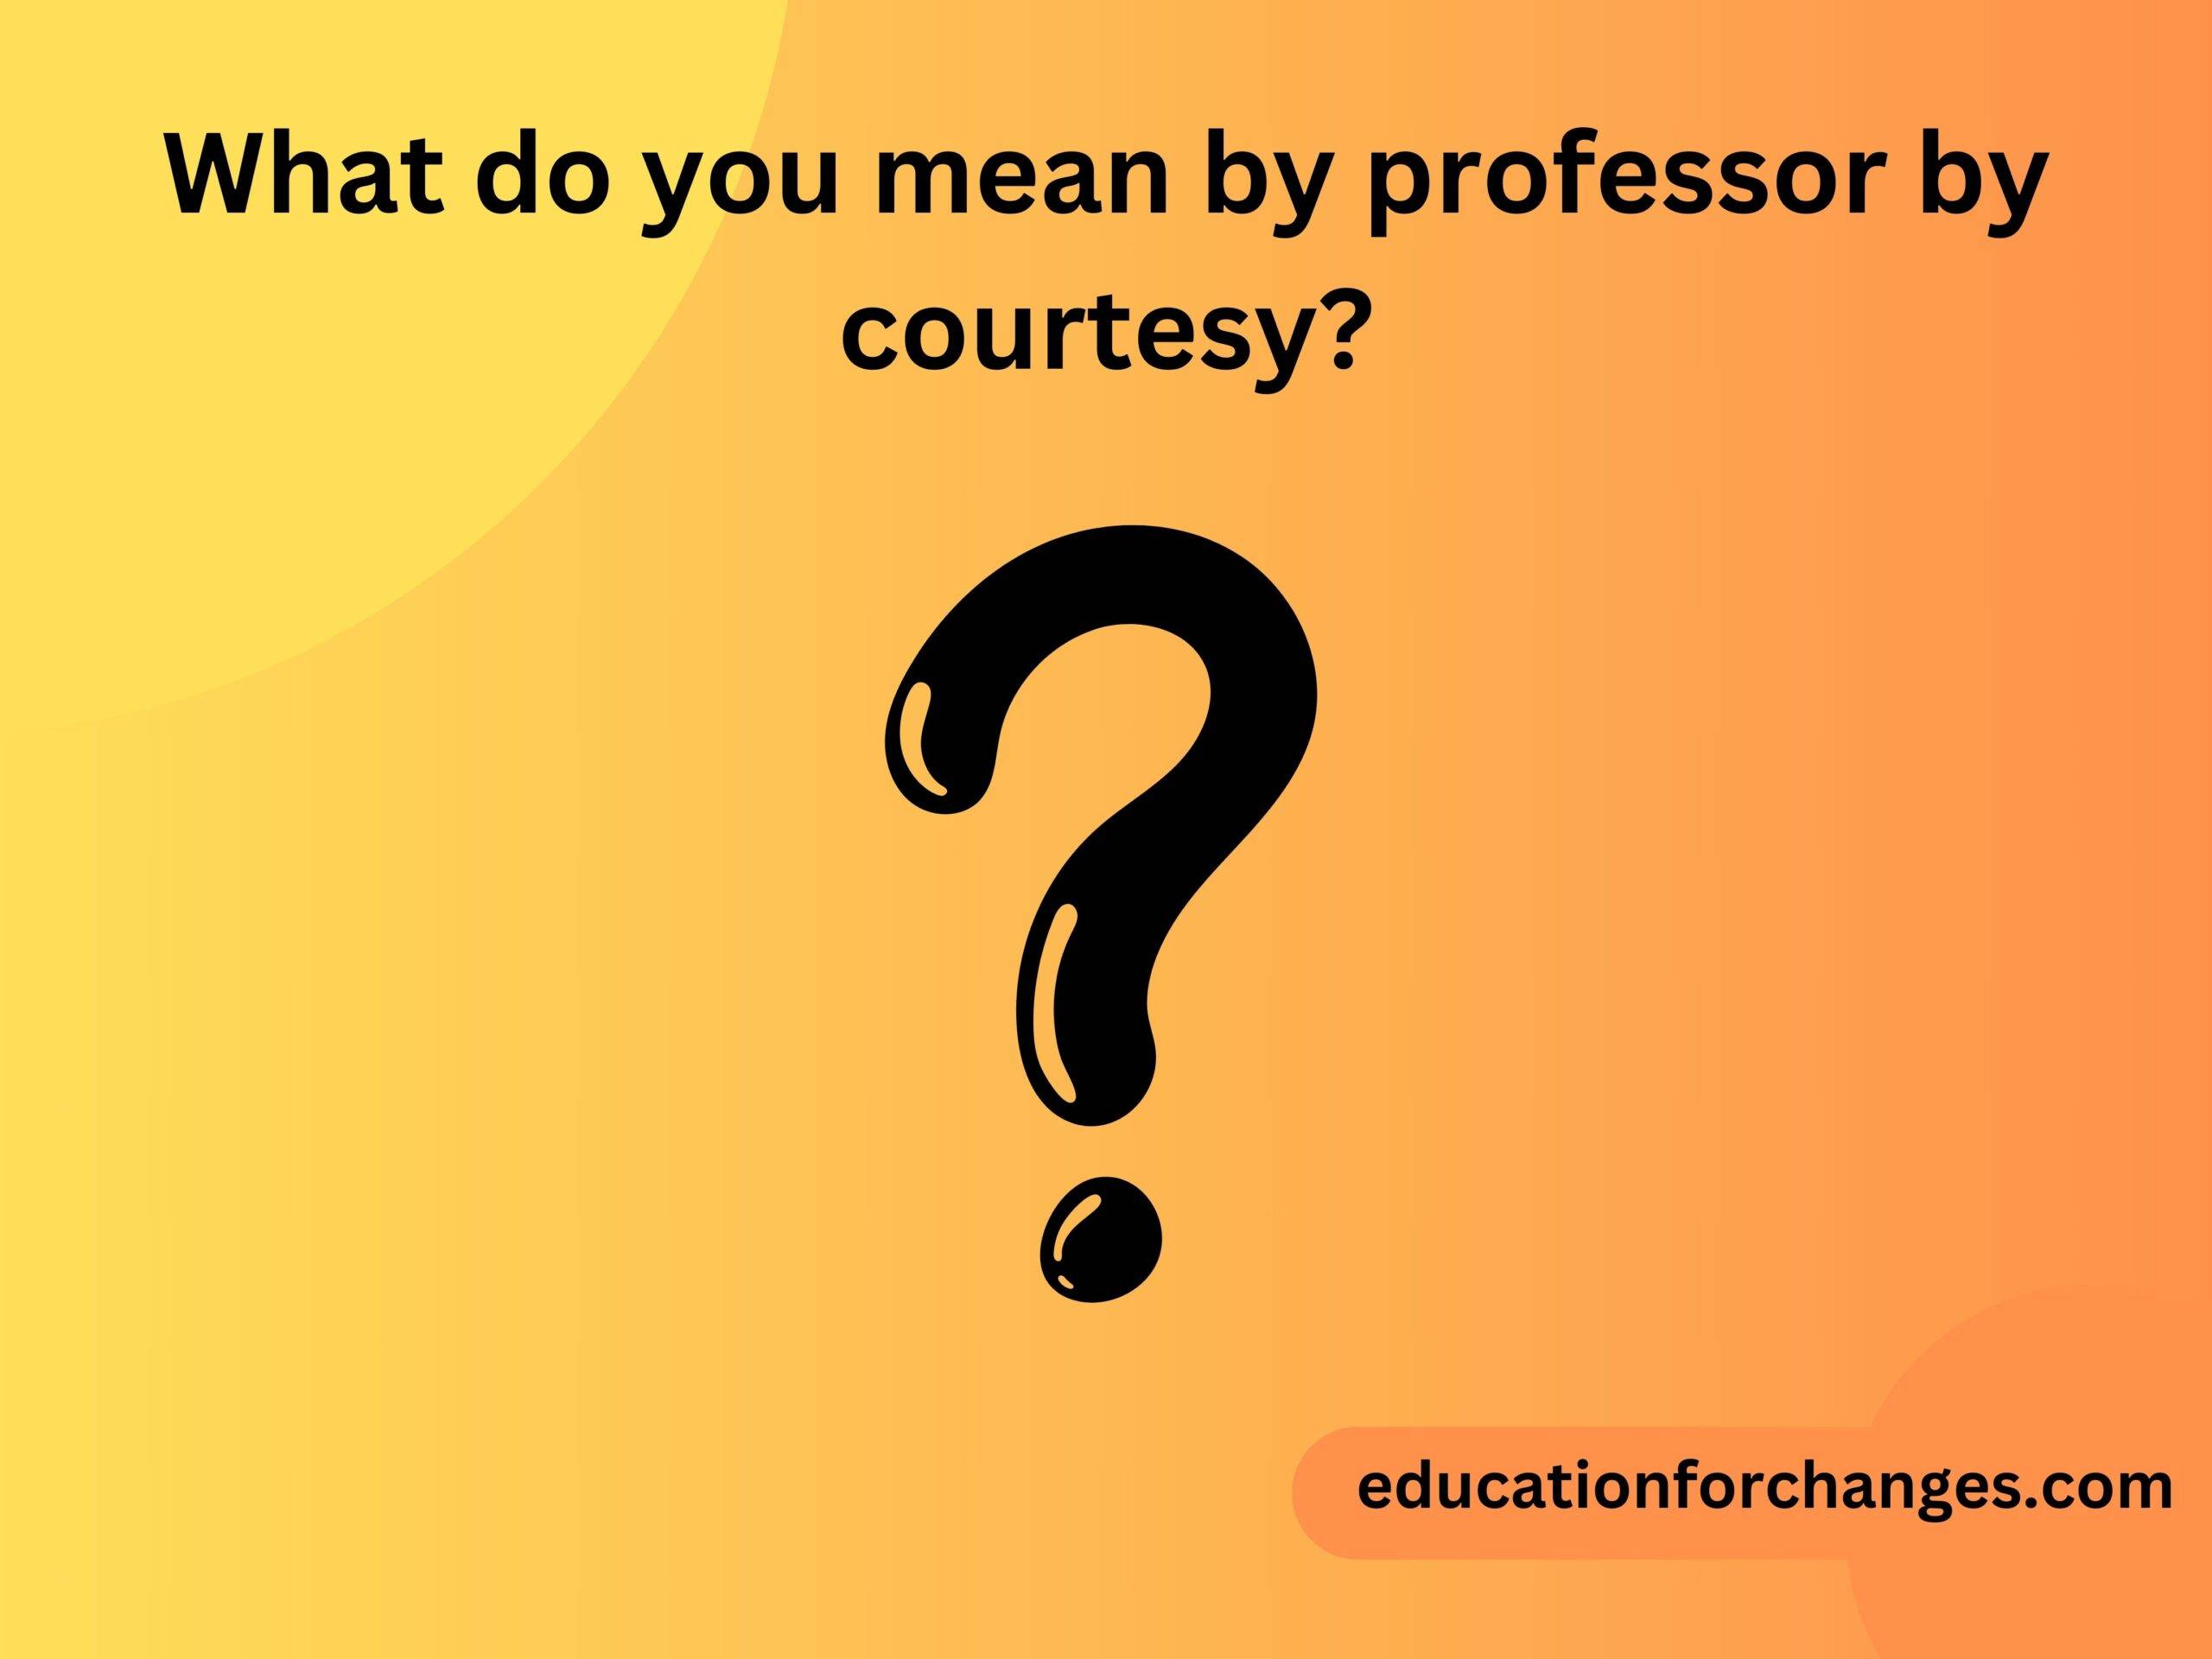 What do you mean by professor by courtesy